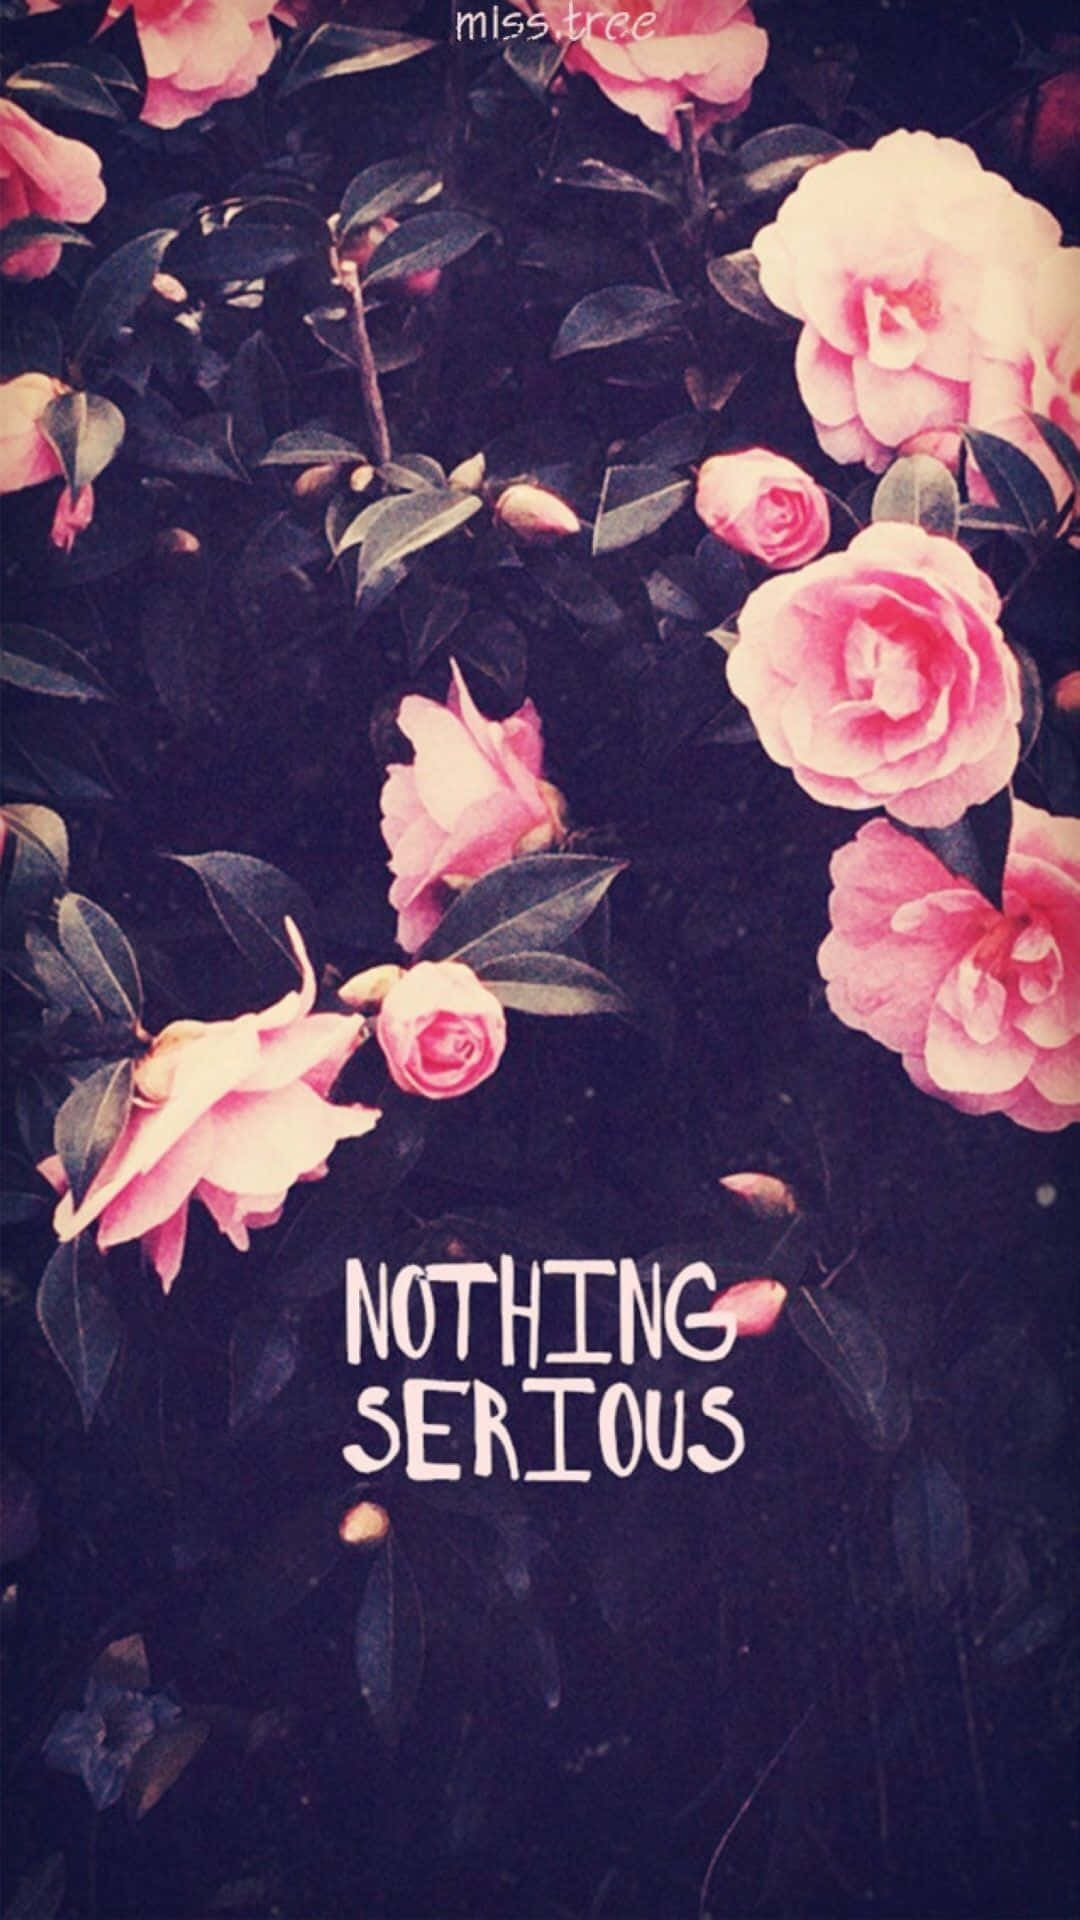 Nothing Serious With Pink Flowers Wallpaper